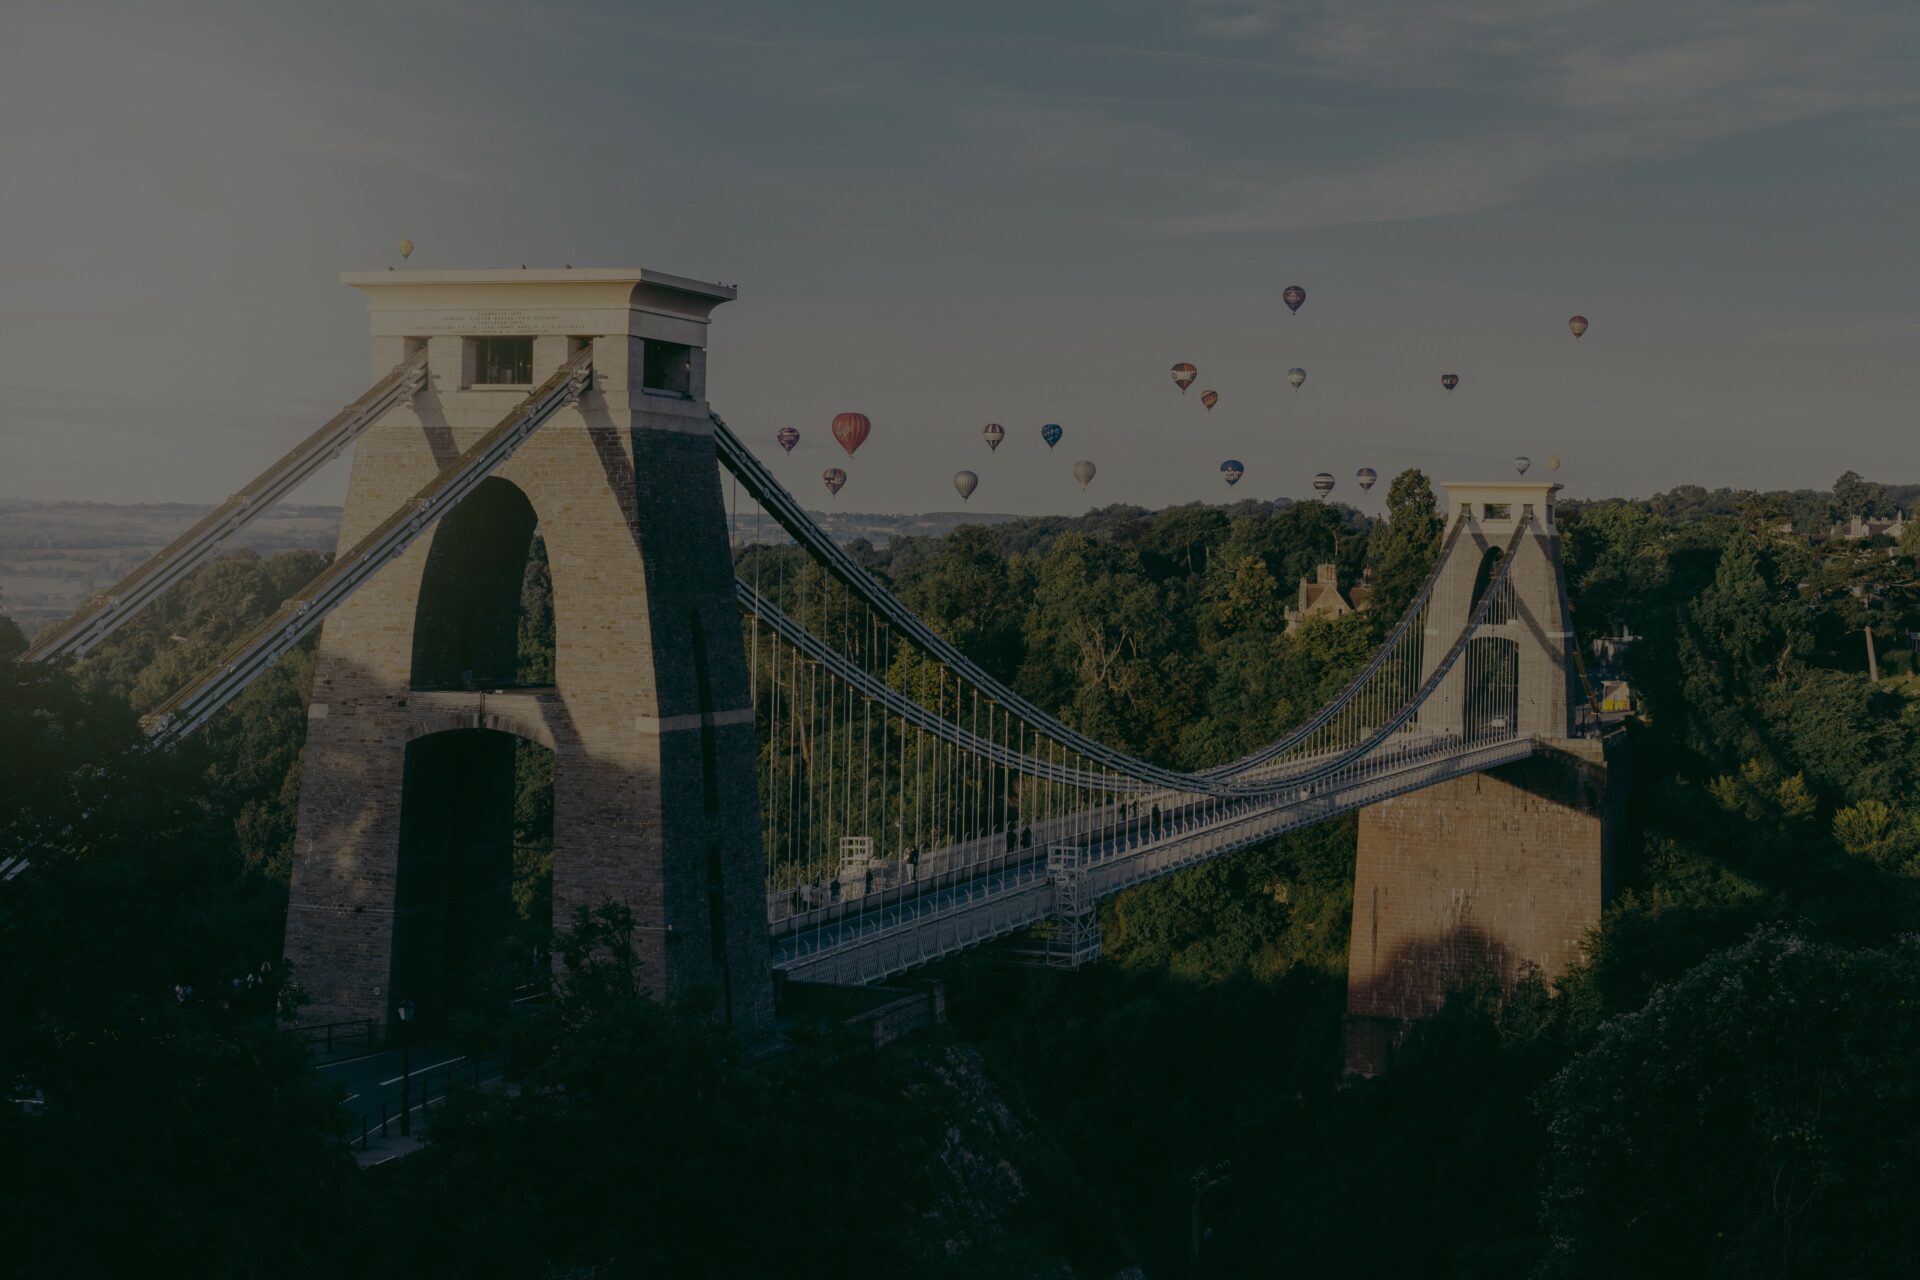 Clifton Suspension Bridge at Sunrise with a group of colourful hot air balloons in the background